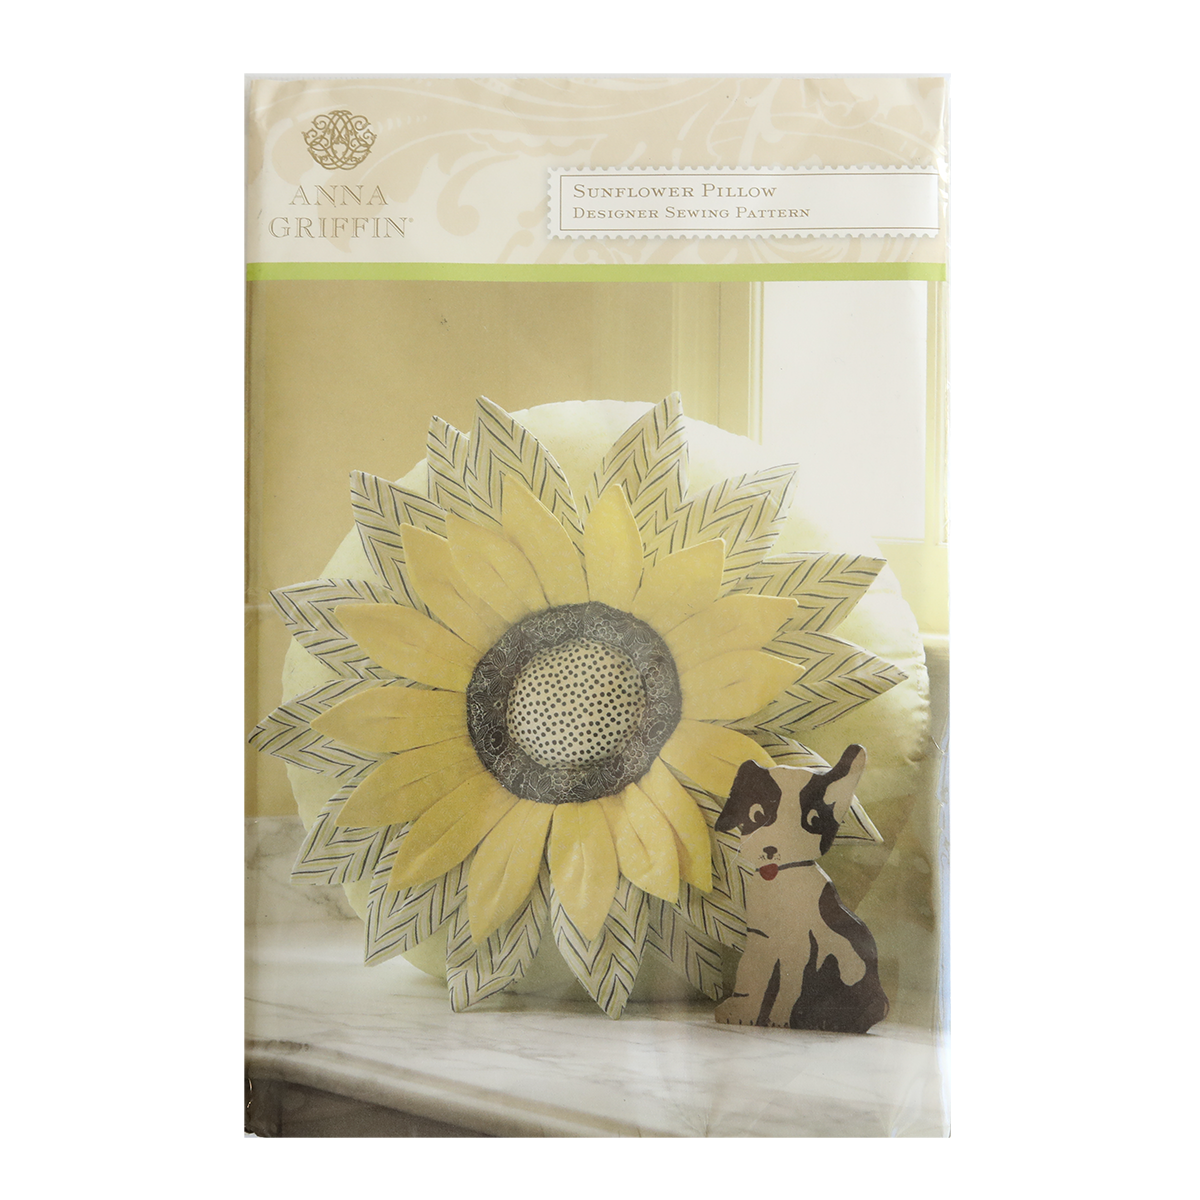 A dog-themed Sunflower Pillow Pattern, adding whimsy to any space.